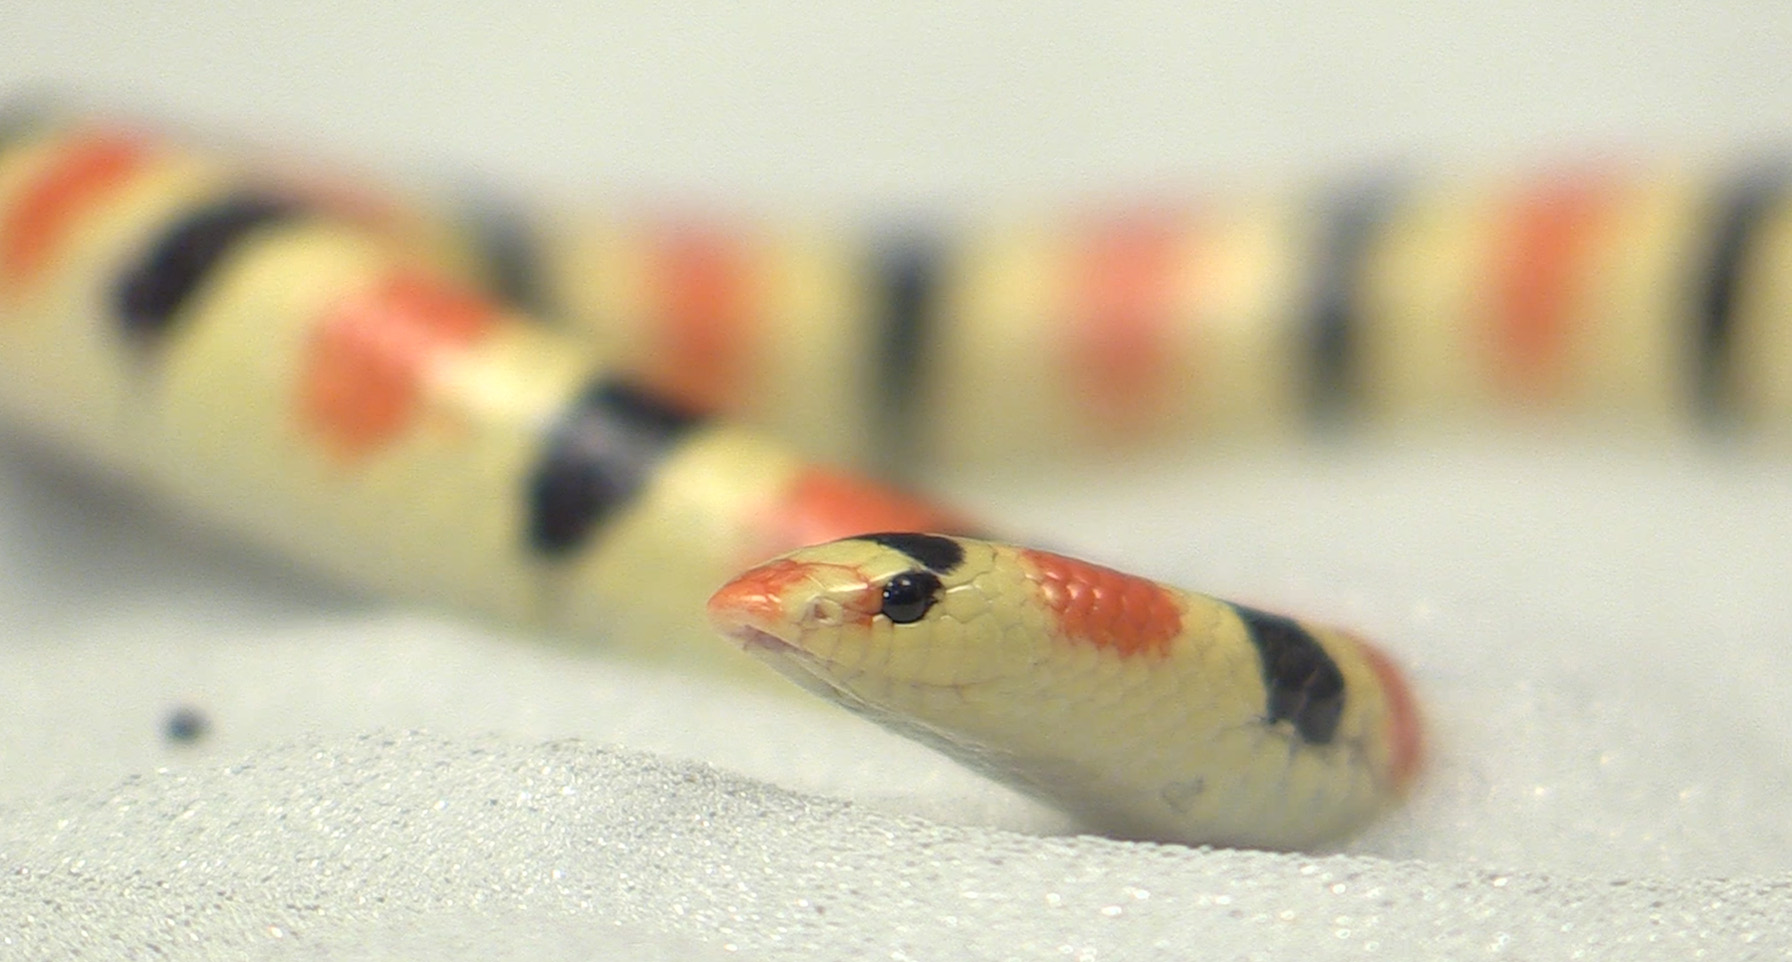 The shovel-nosed snake, which is found in the Mojave Desert of the southeast United States, has an elongated body and low-friction skin, which allow it to swim through sand rapidly and efficiently. It is shown here in a bed of sand in a Georgia Tech laboratory. (Credit: Jason Maderer)